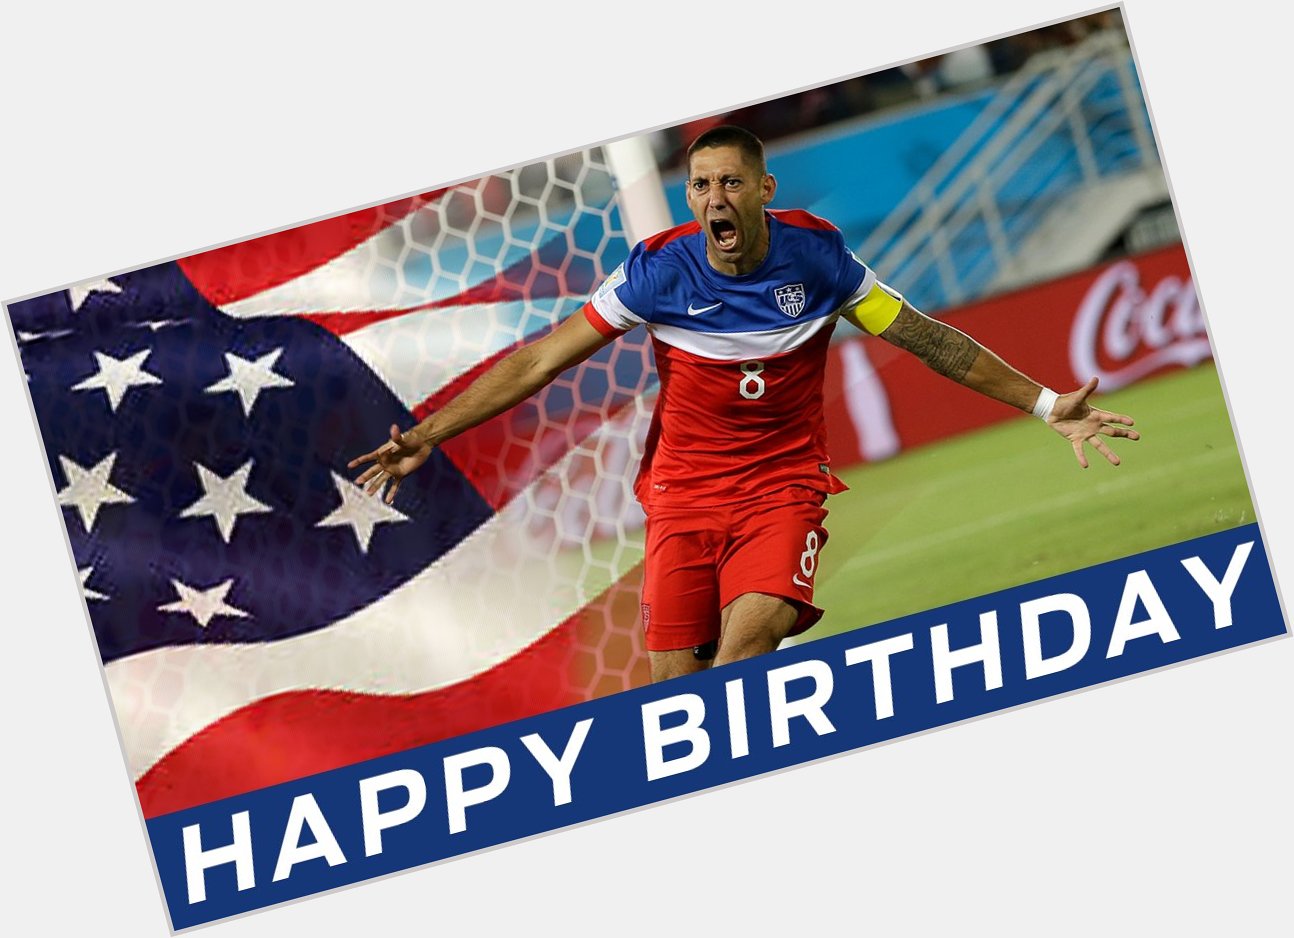 Happy birthday to the second leading all-time scorer, Clint Dempsey! 